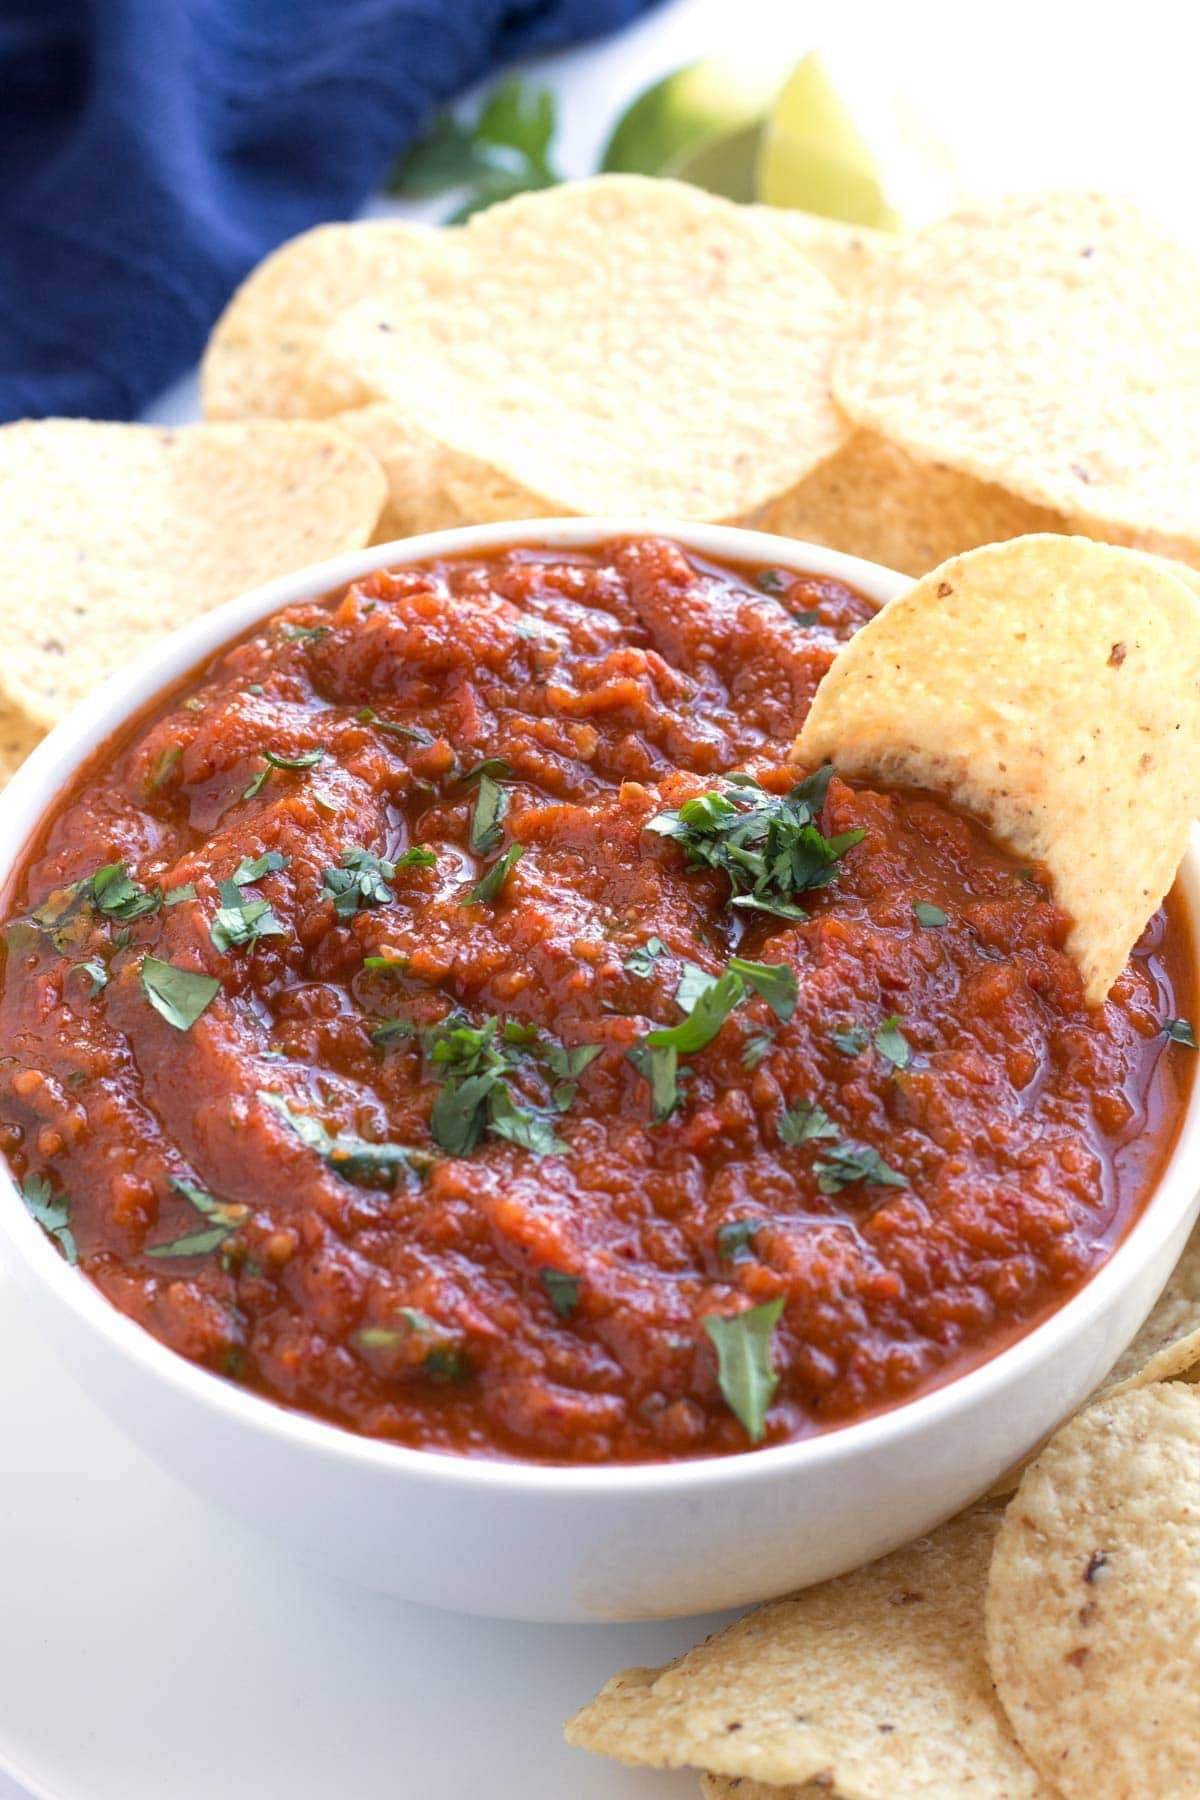 Homemade salsa sauce with herbs and tacos in a bowl